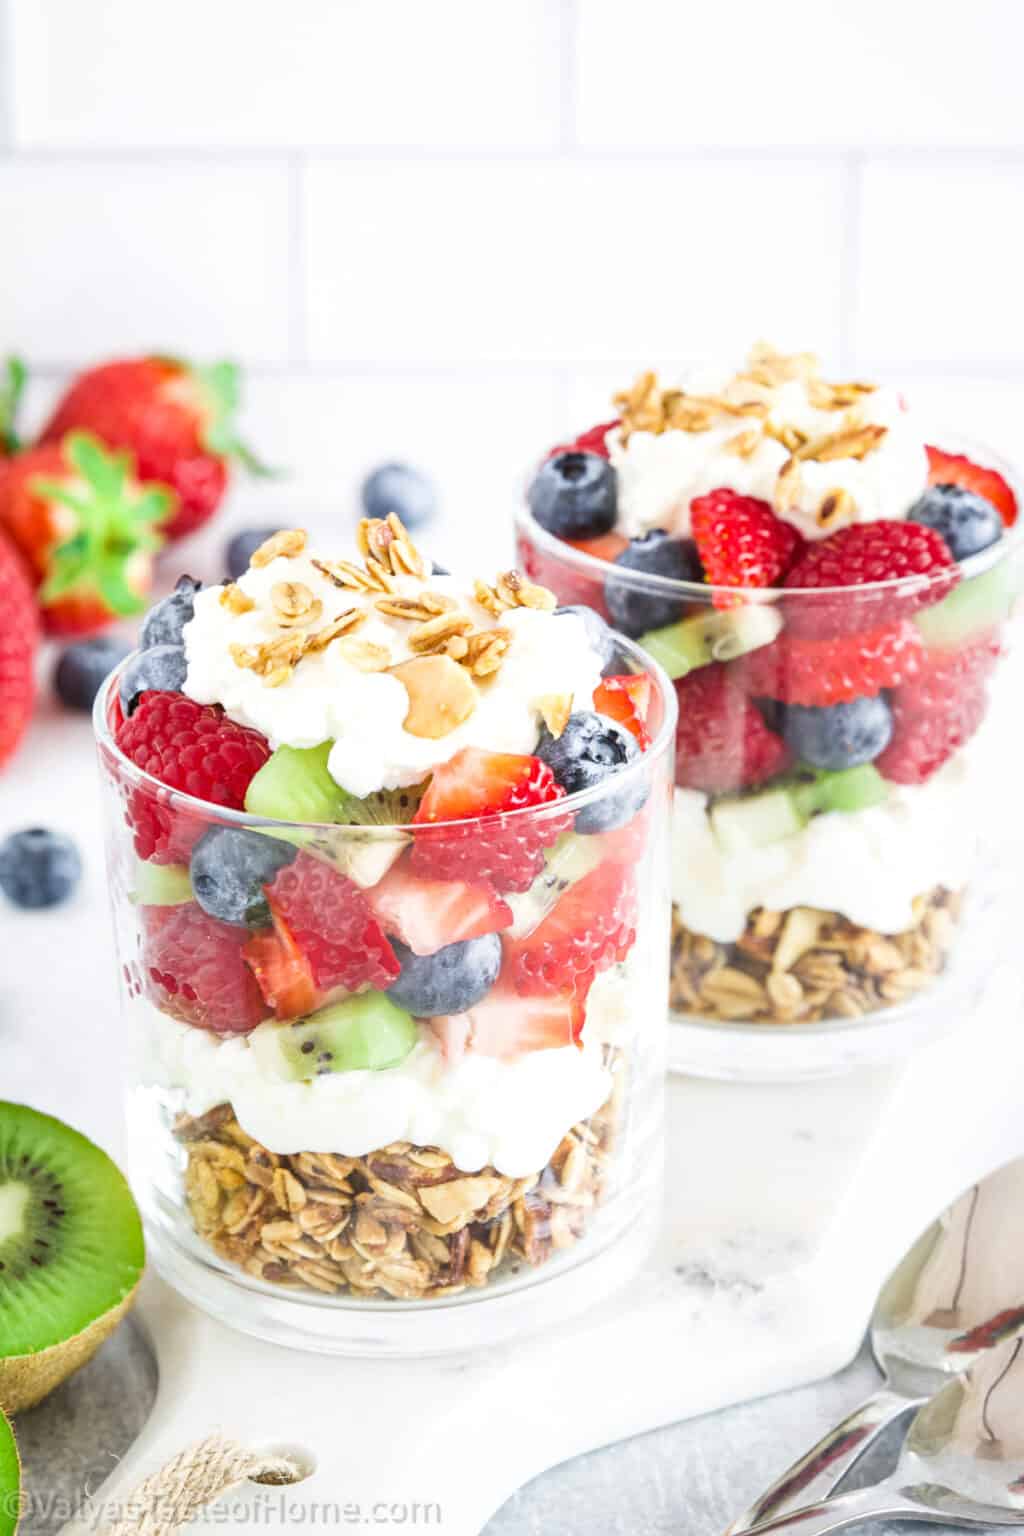 Breakfast Cottage Cheese Parfait Recipe with Fruits